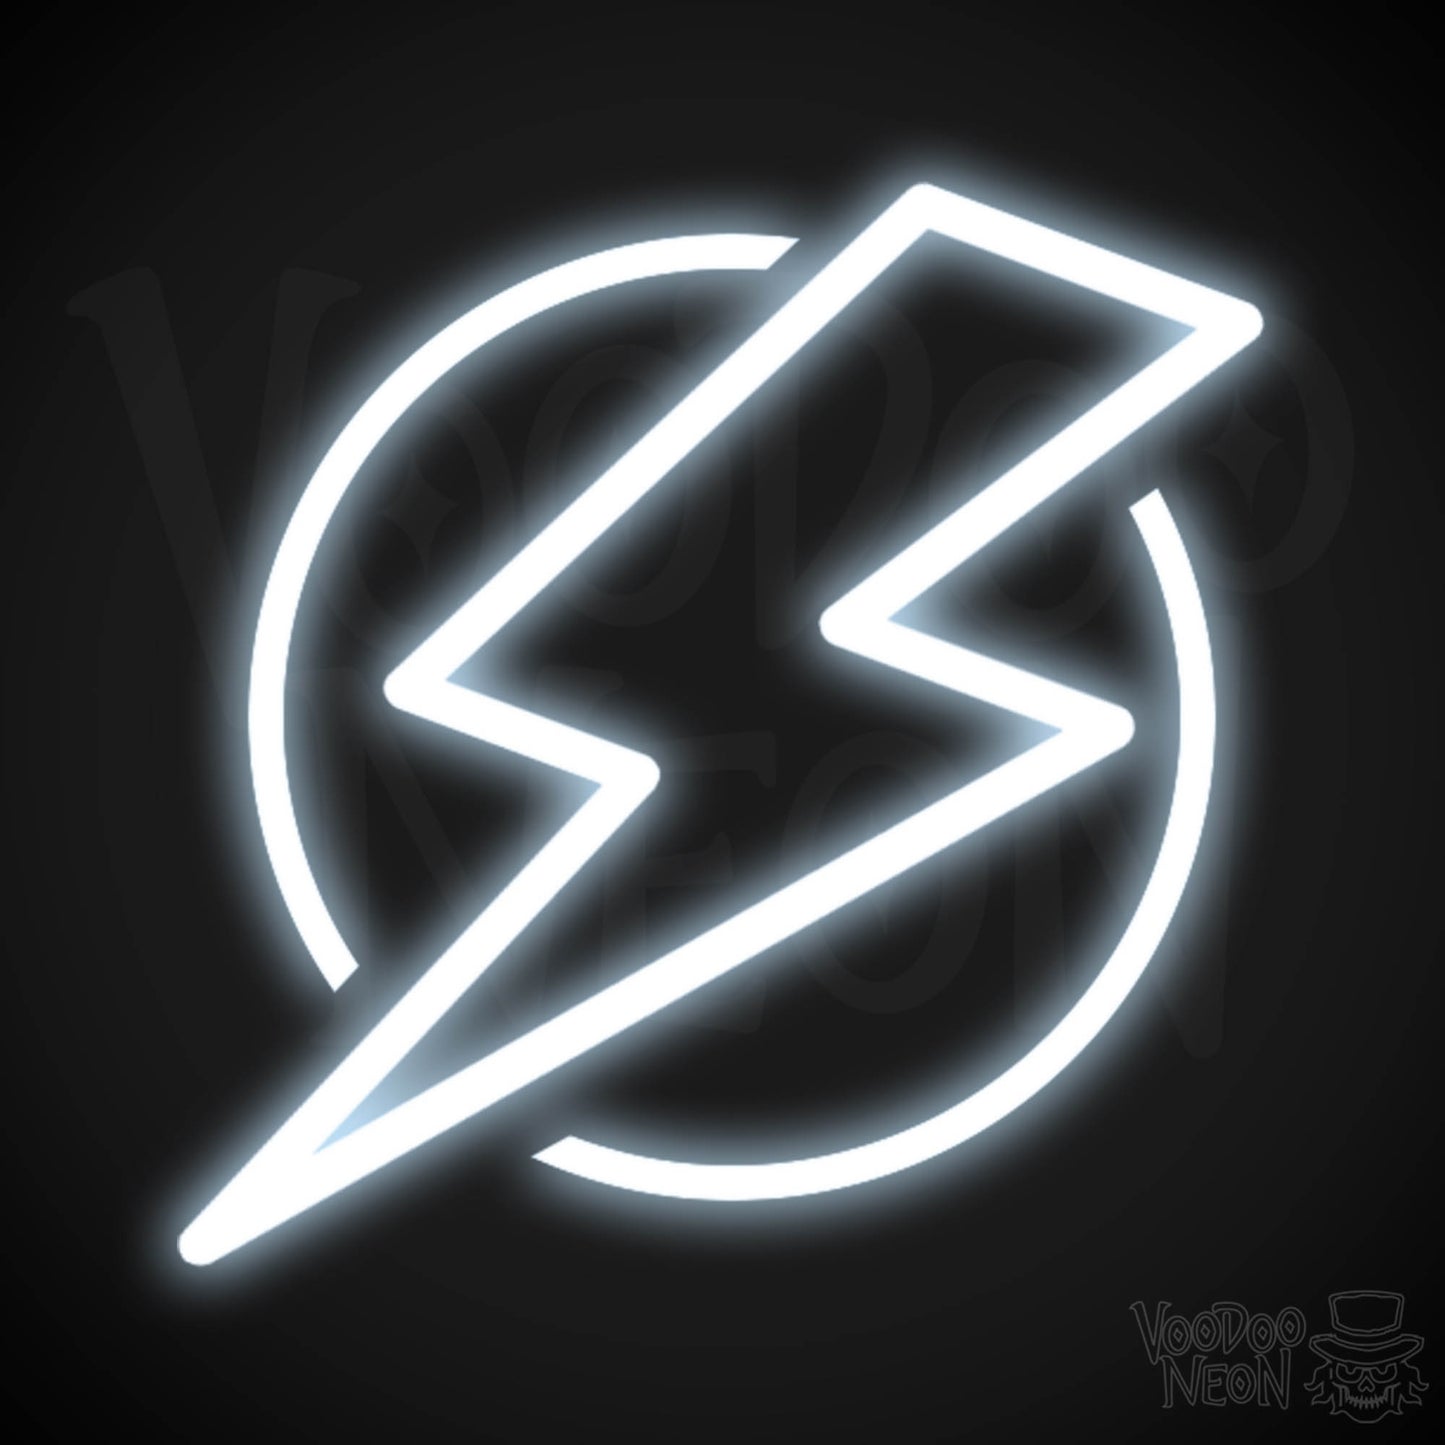 Electric Neon Wall Art - Neon Electric Sign - Wall Art - Color Cool White